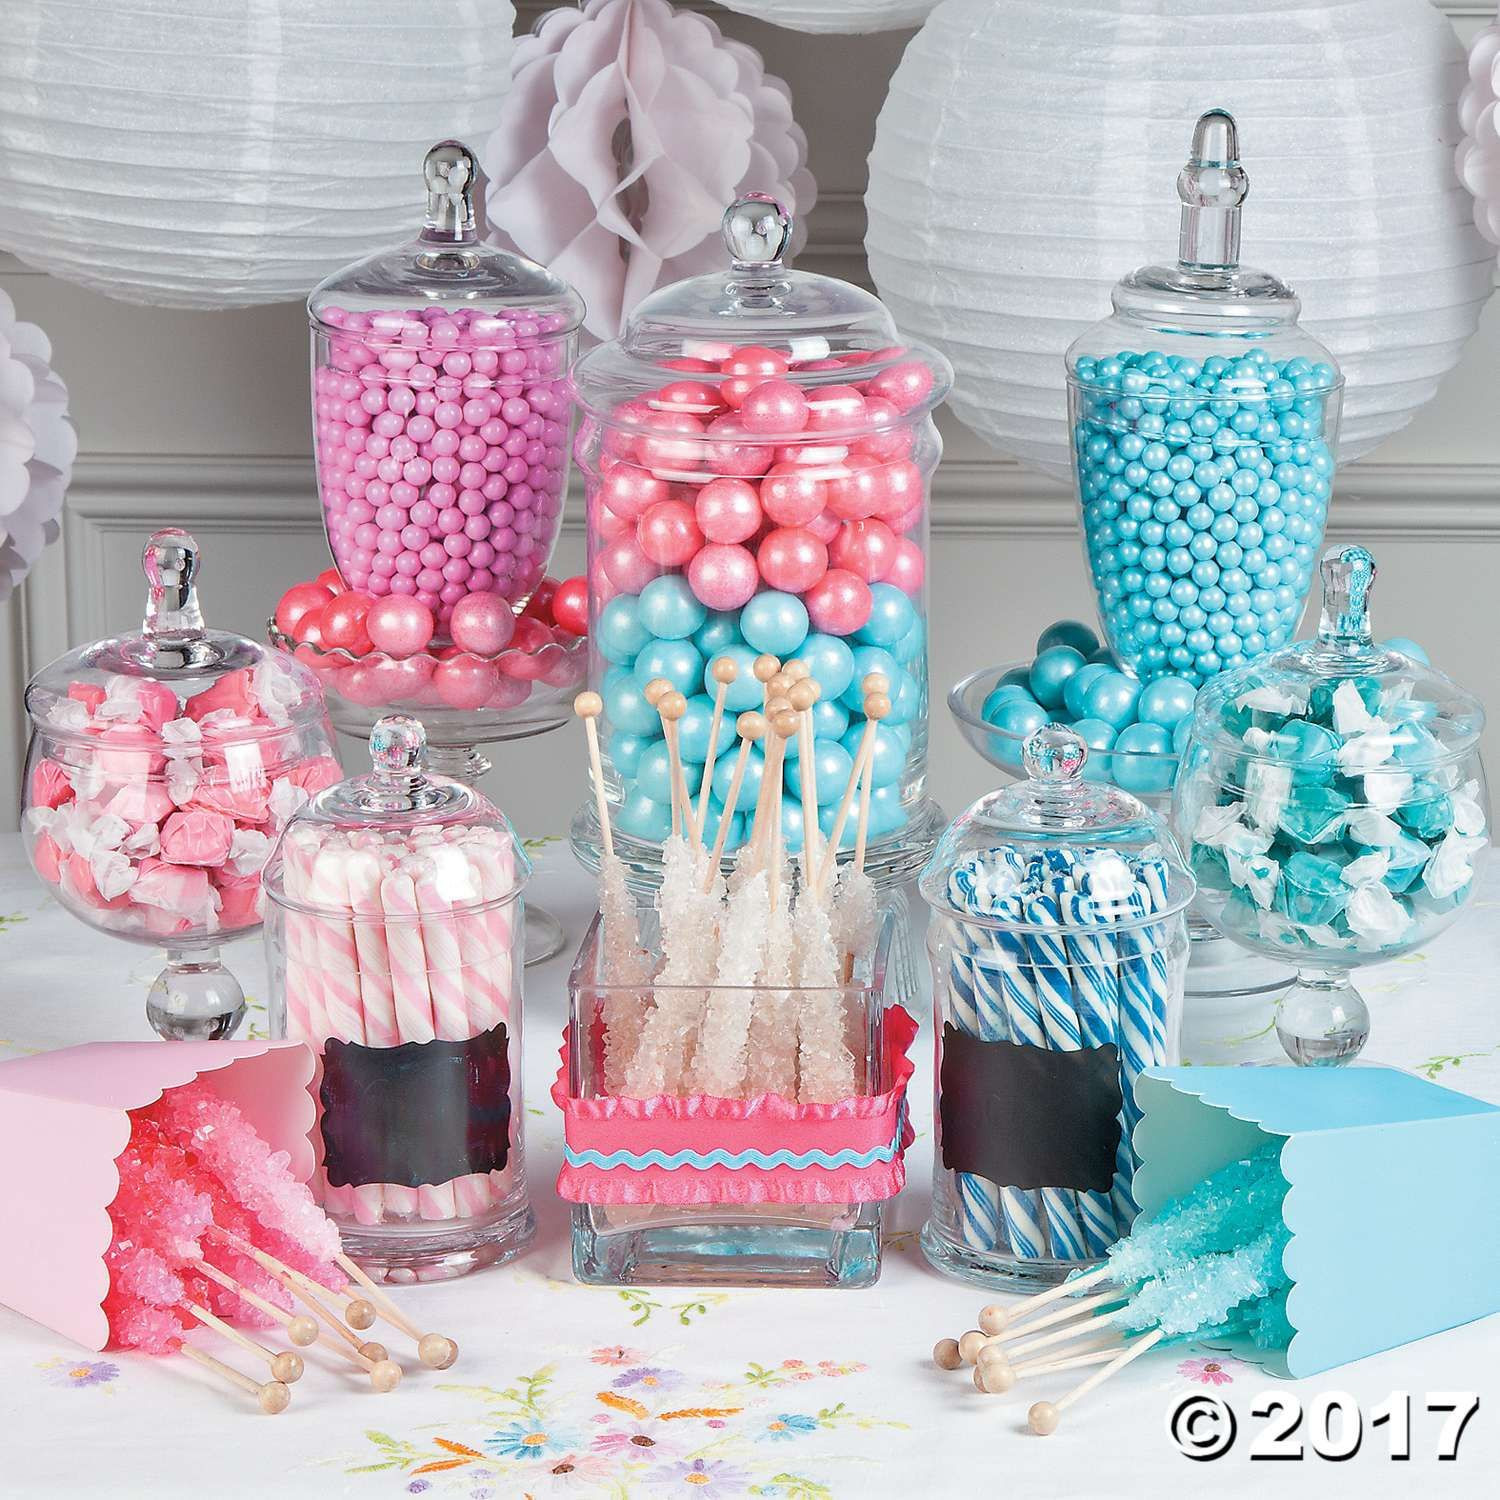 Gender Reveal Party Decoration Ideas
 Gender Reveal Party 42 mybabydoo